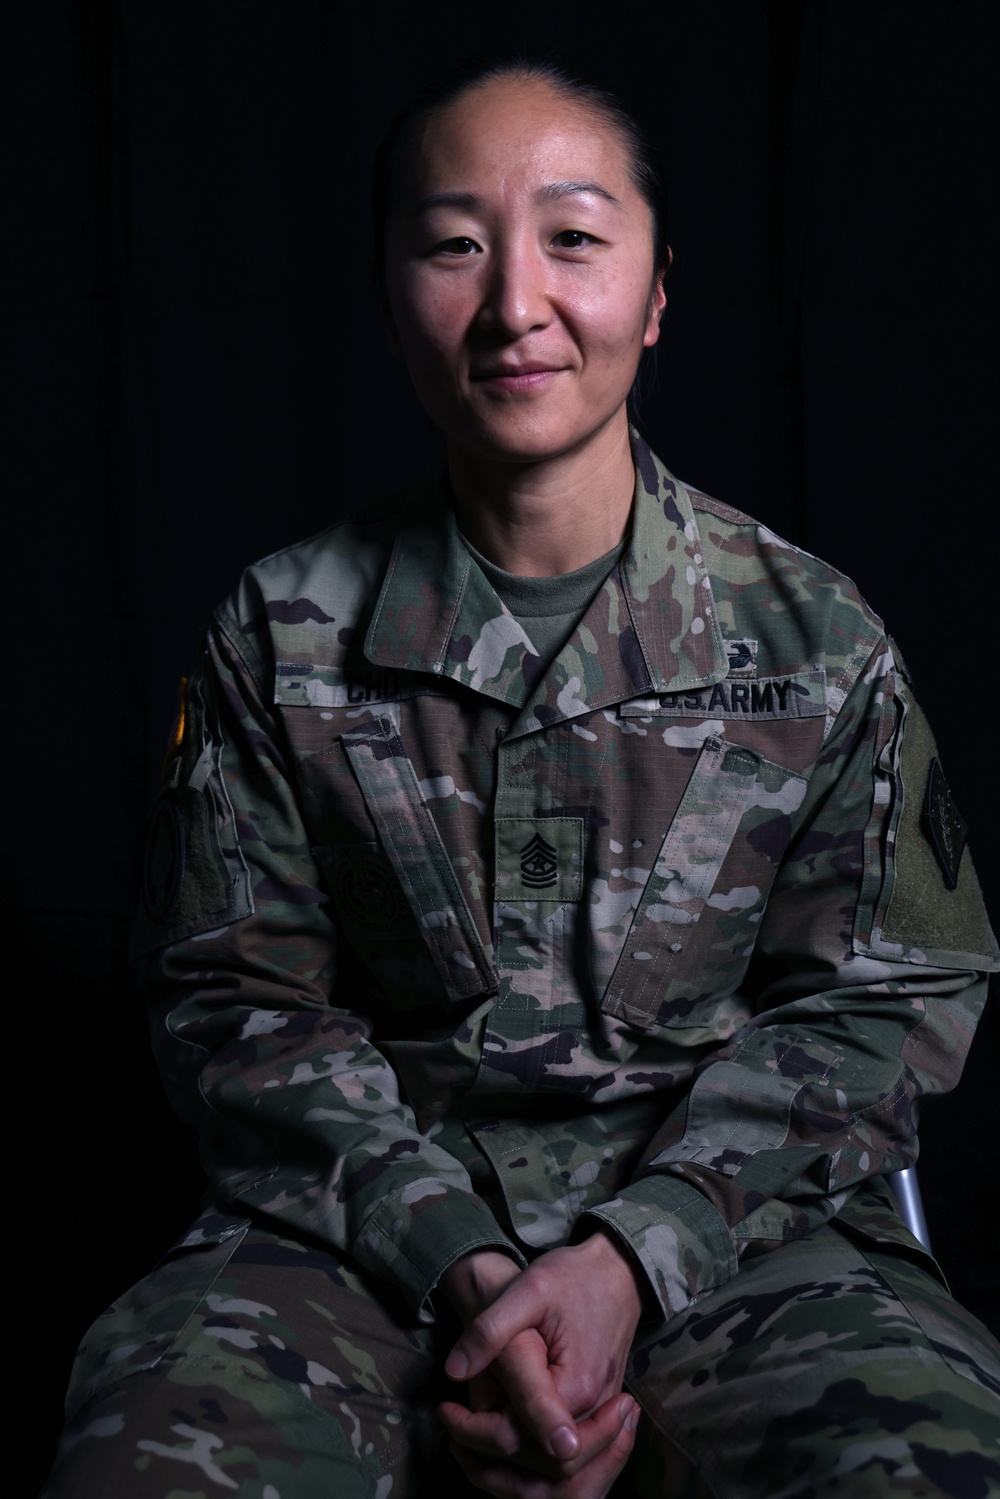 Senior Chemical Corps noncommissioned officer selected for command sergeant major